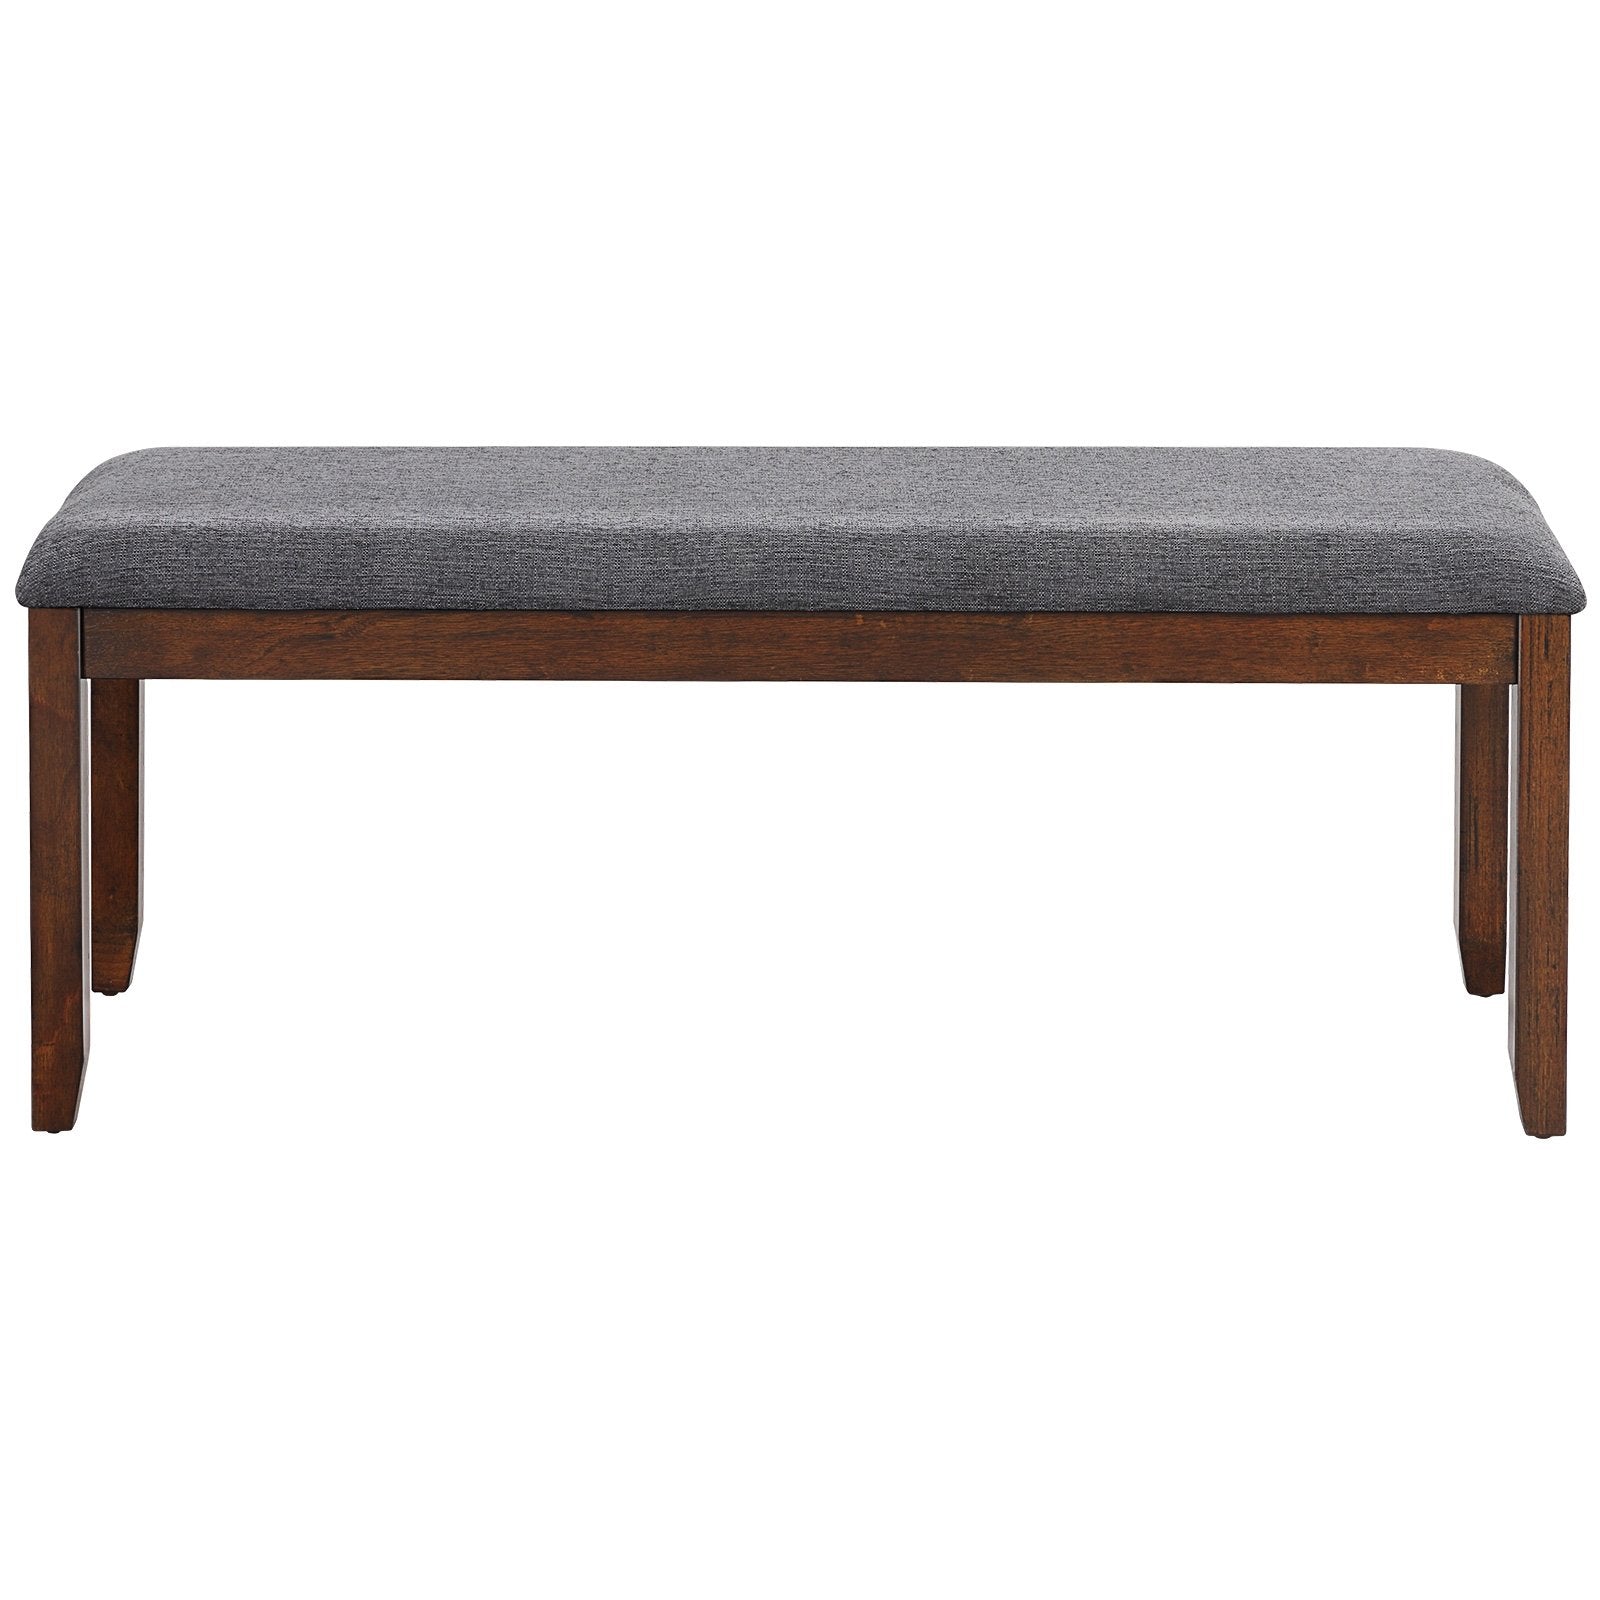 Upholstered Entryway Bench Footstool with Wood Legs, Dark Gray - Gallery Canada